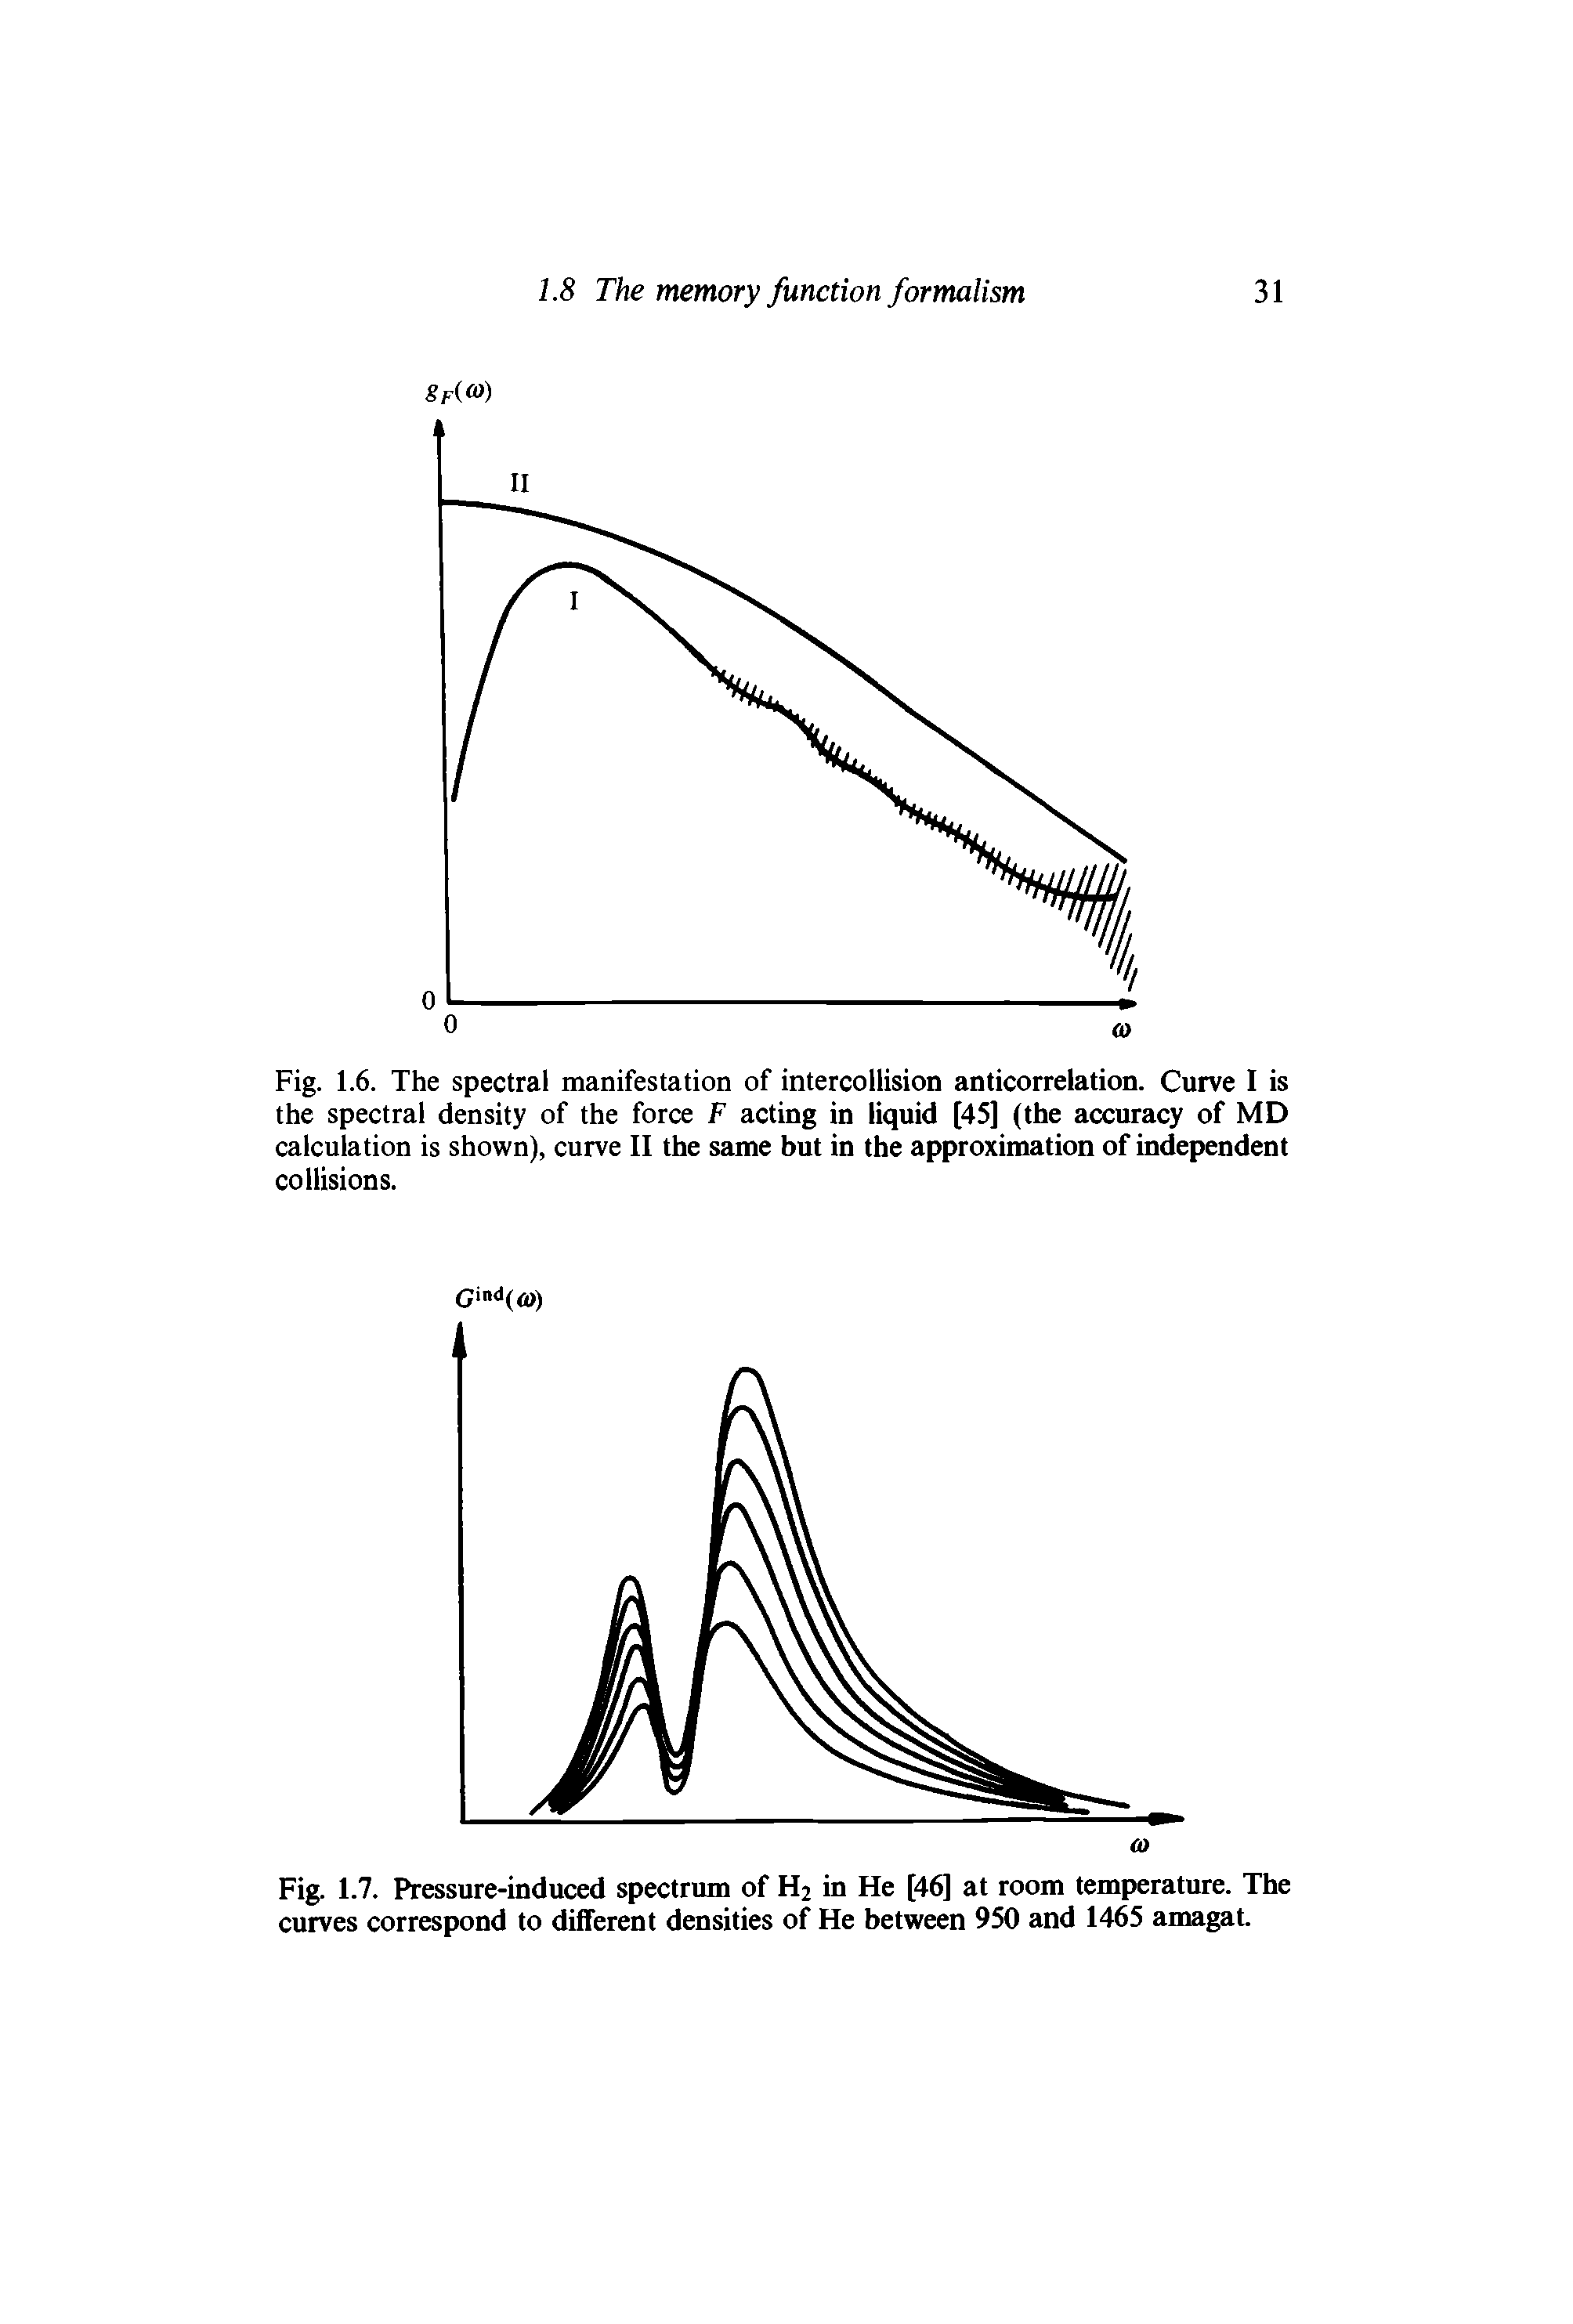 Fig. 1.6. The spectral manifestation of intercollision anticorrelation. Curve I is the spectral density of the force F acting in liquid [45] (the accuracy of MD calculation is shown), curve II the same but in the approximation of independent collisions.